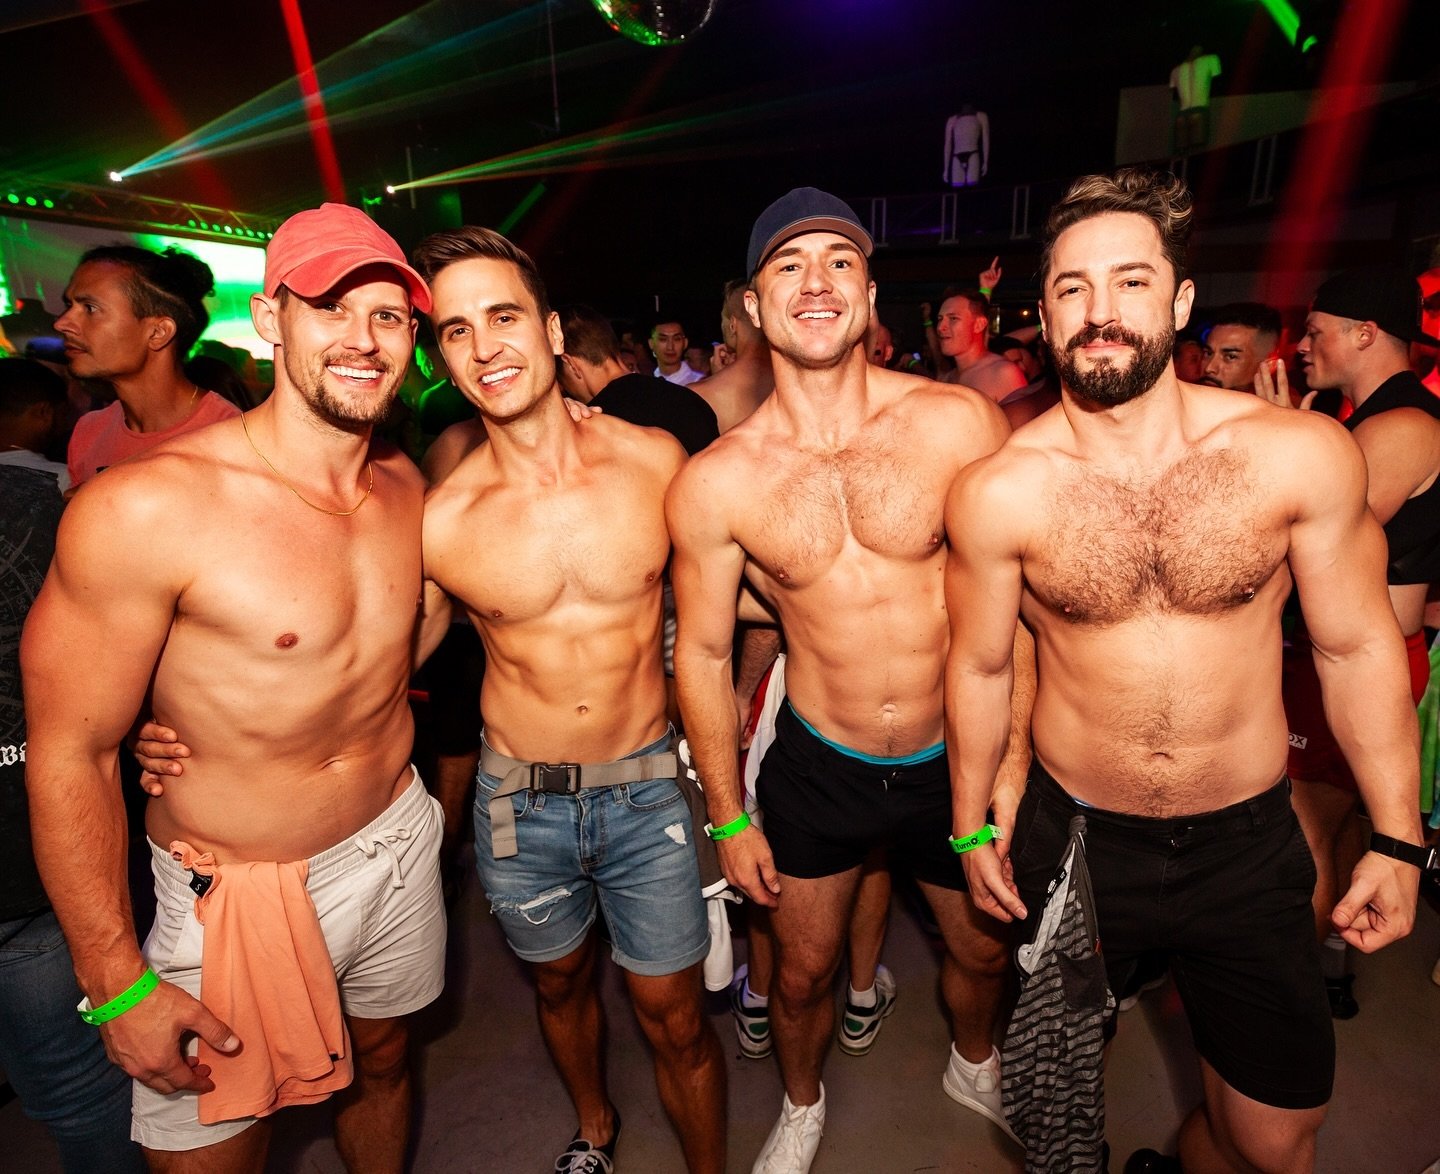 🥵😈 join us for the largest San Diego Pride nighttime parties featuring fully produced indoor/outdoor stages, 9 incredible DJs, the nicest (and hottest 😈) guys, a vendor village, an arcade, and more! www.turnsd.com/pride for tickets and info